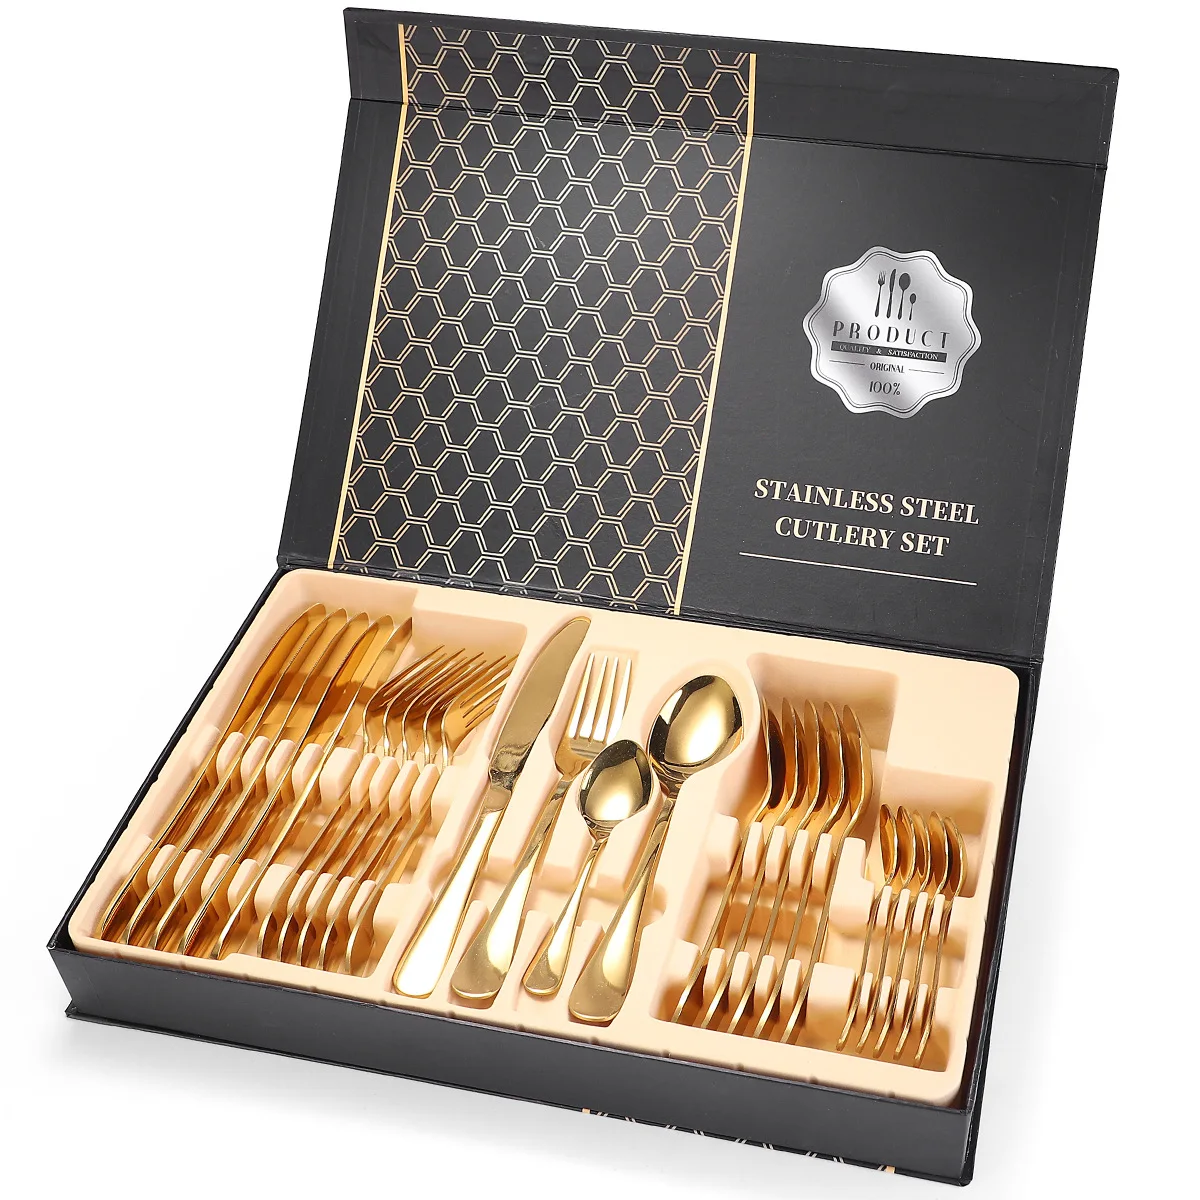 STAINLESS STEEL CUTLERY SET 16/24/40 PIECES GIFT BOX SET SILVER FORK SPOON NEW 